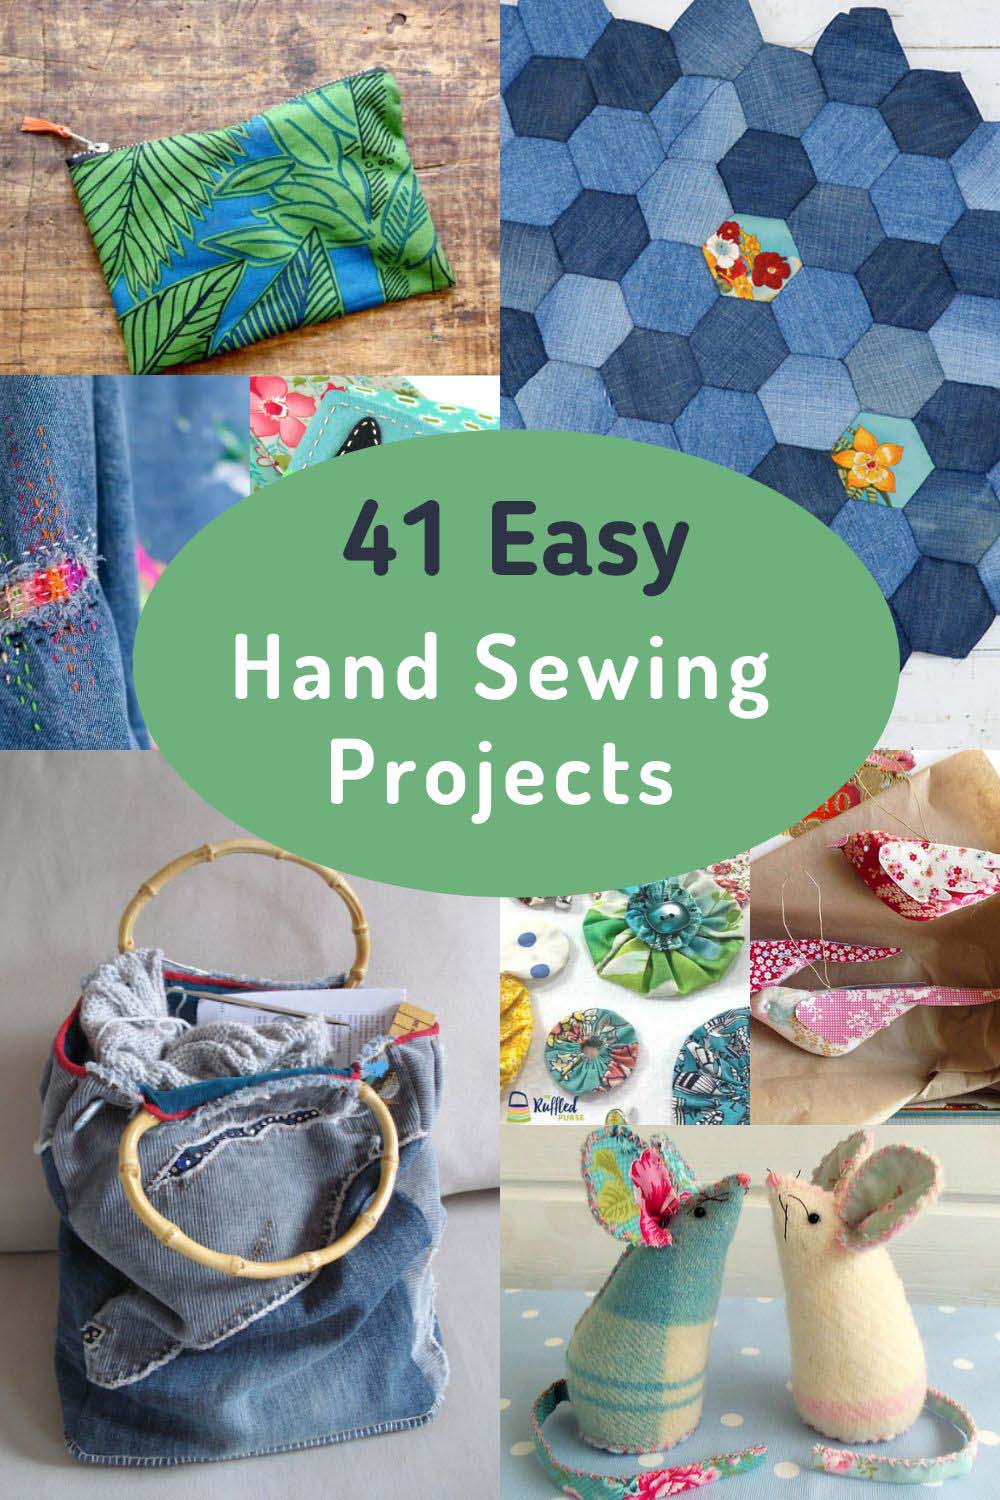 18 Easy Sewing Projects for Beginners to Do